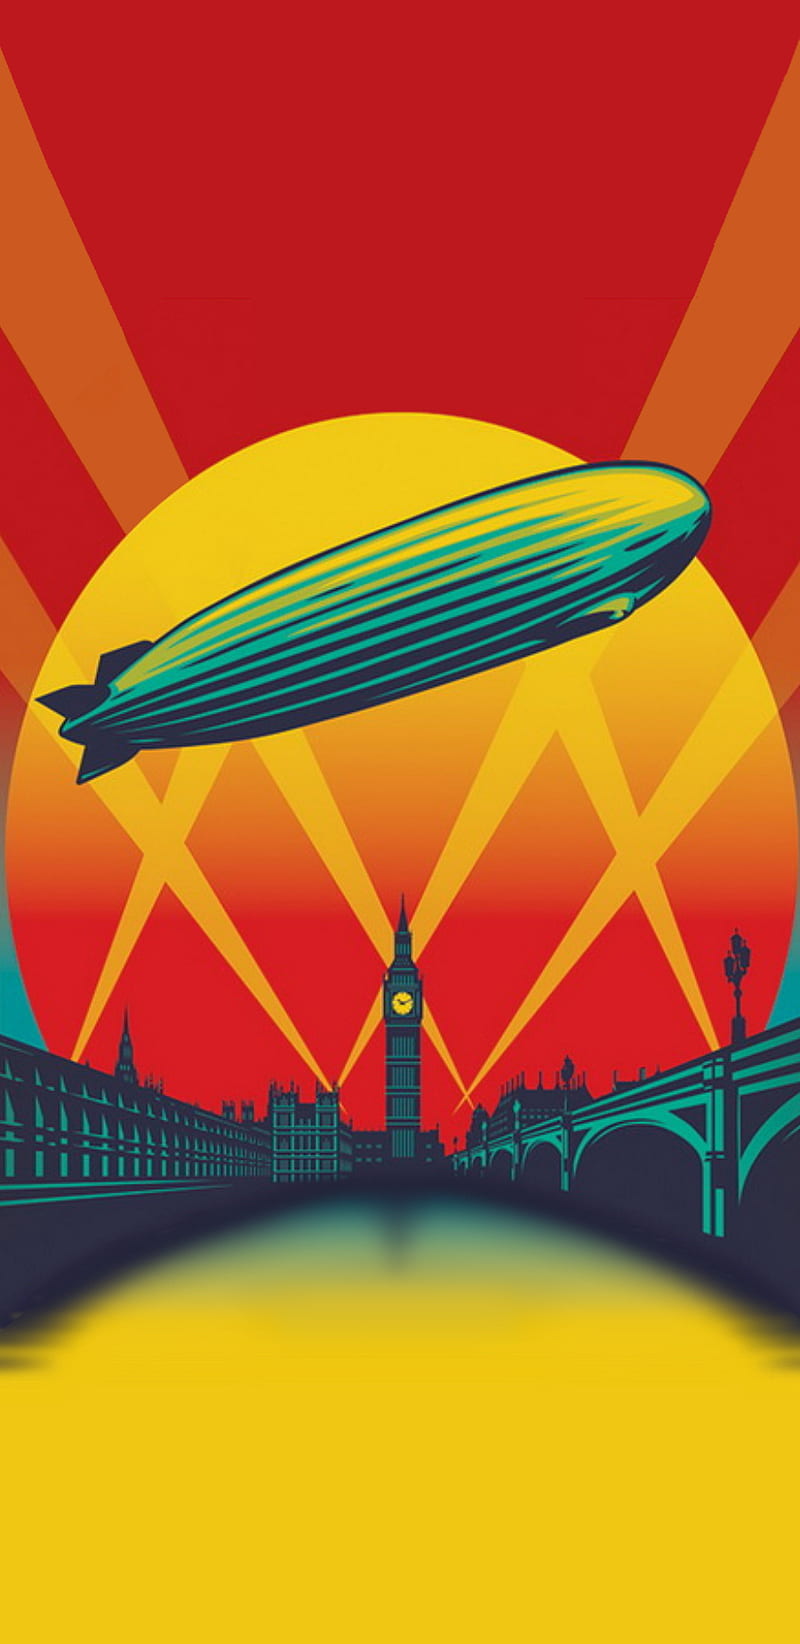 Led Zeppelin Live wallpaper by DiegoTorino  Download on ZEDGE  3a8c